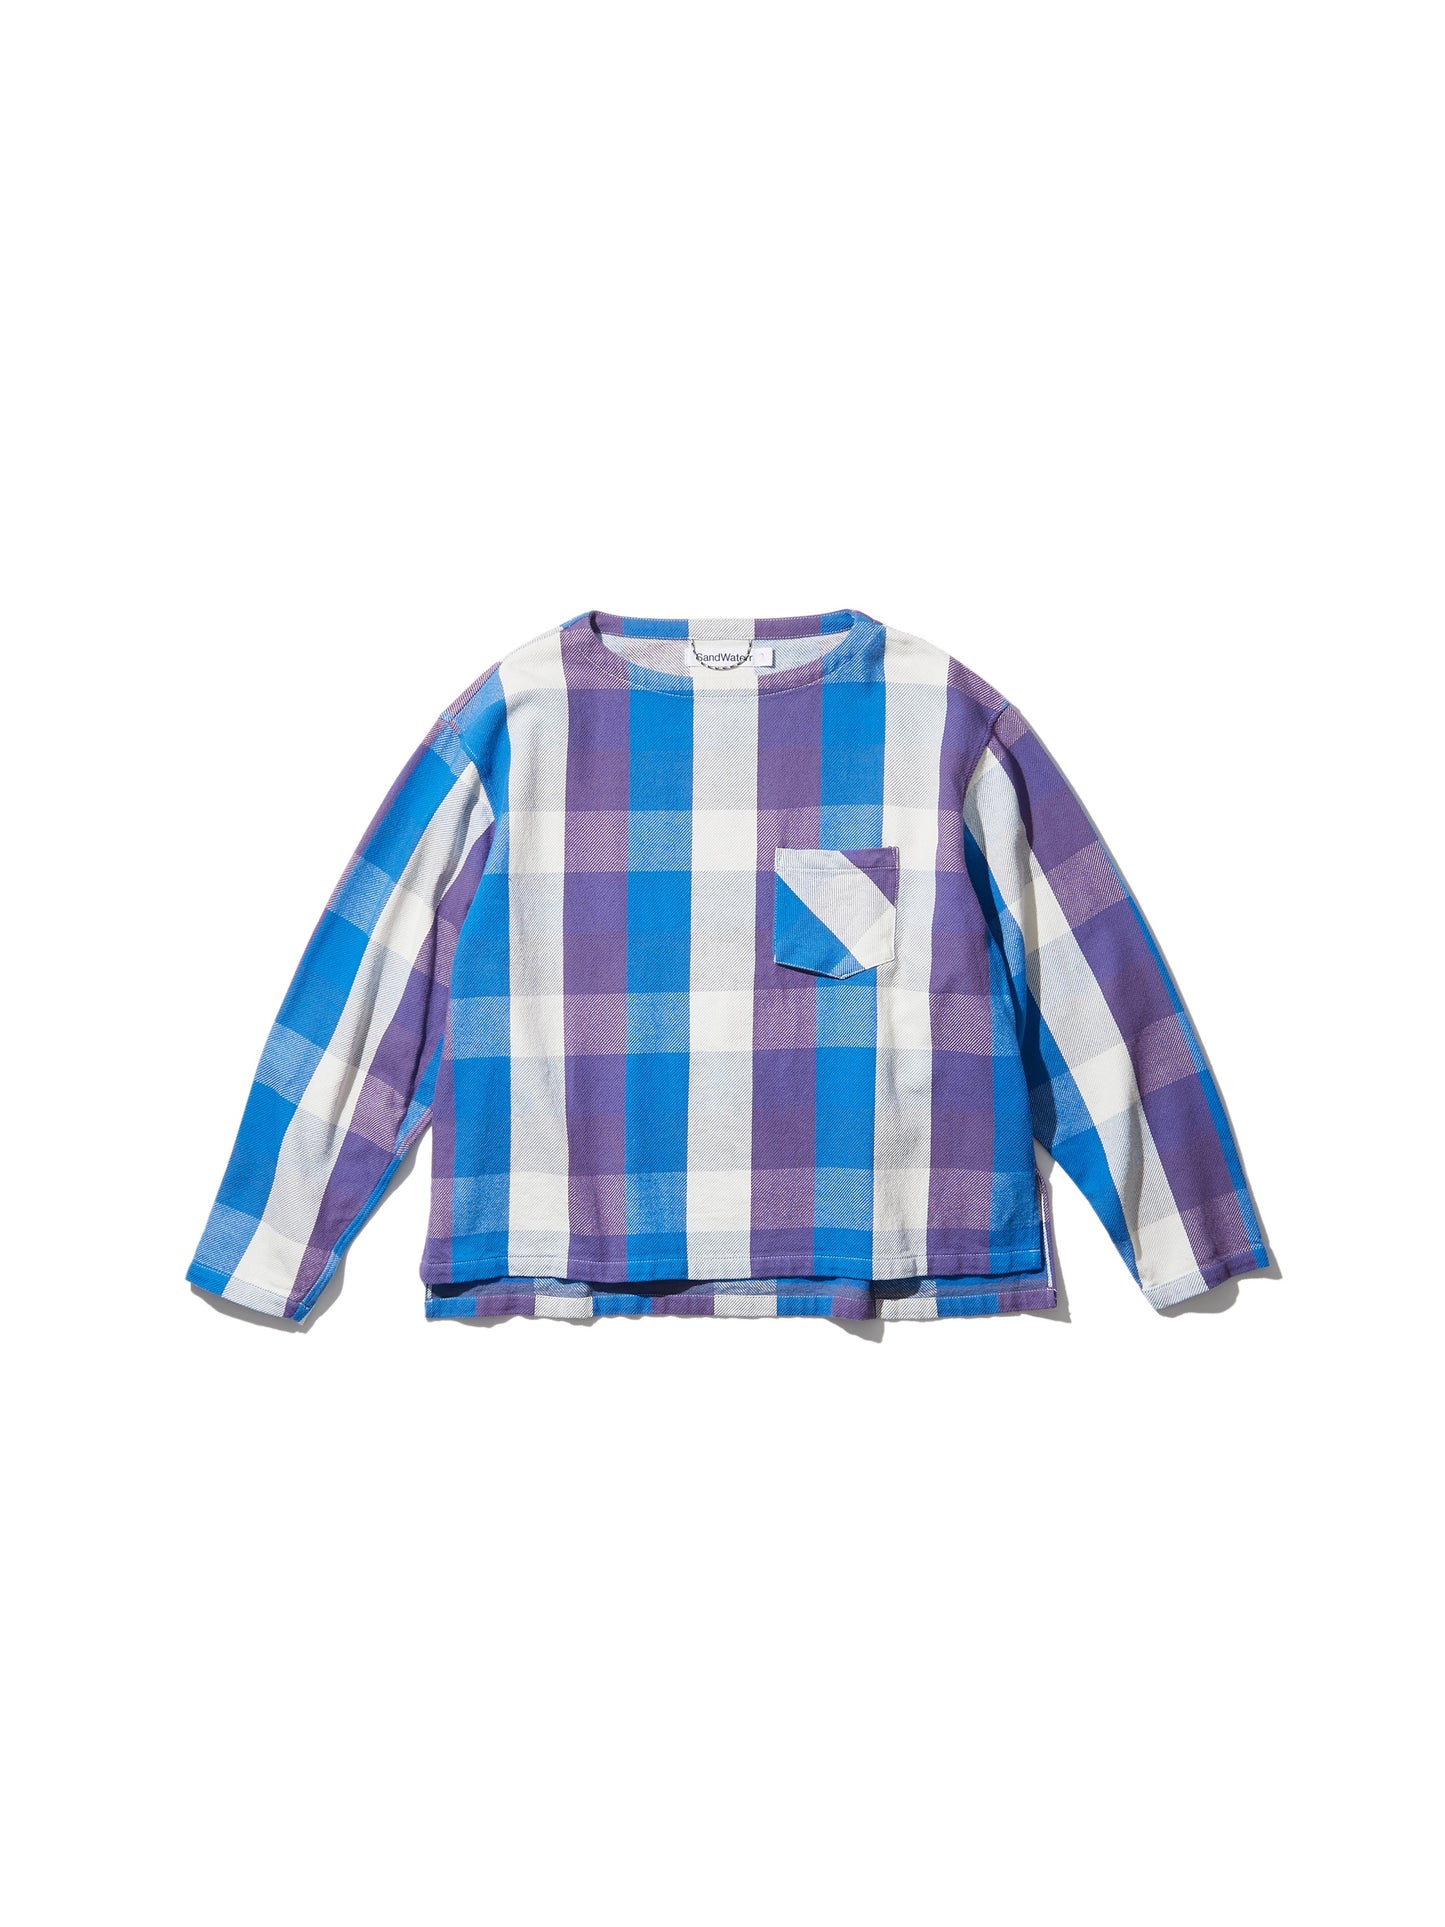 RESEARCHED PULLOVER BOAT NECK SHIRT / FLANNEL CHECK